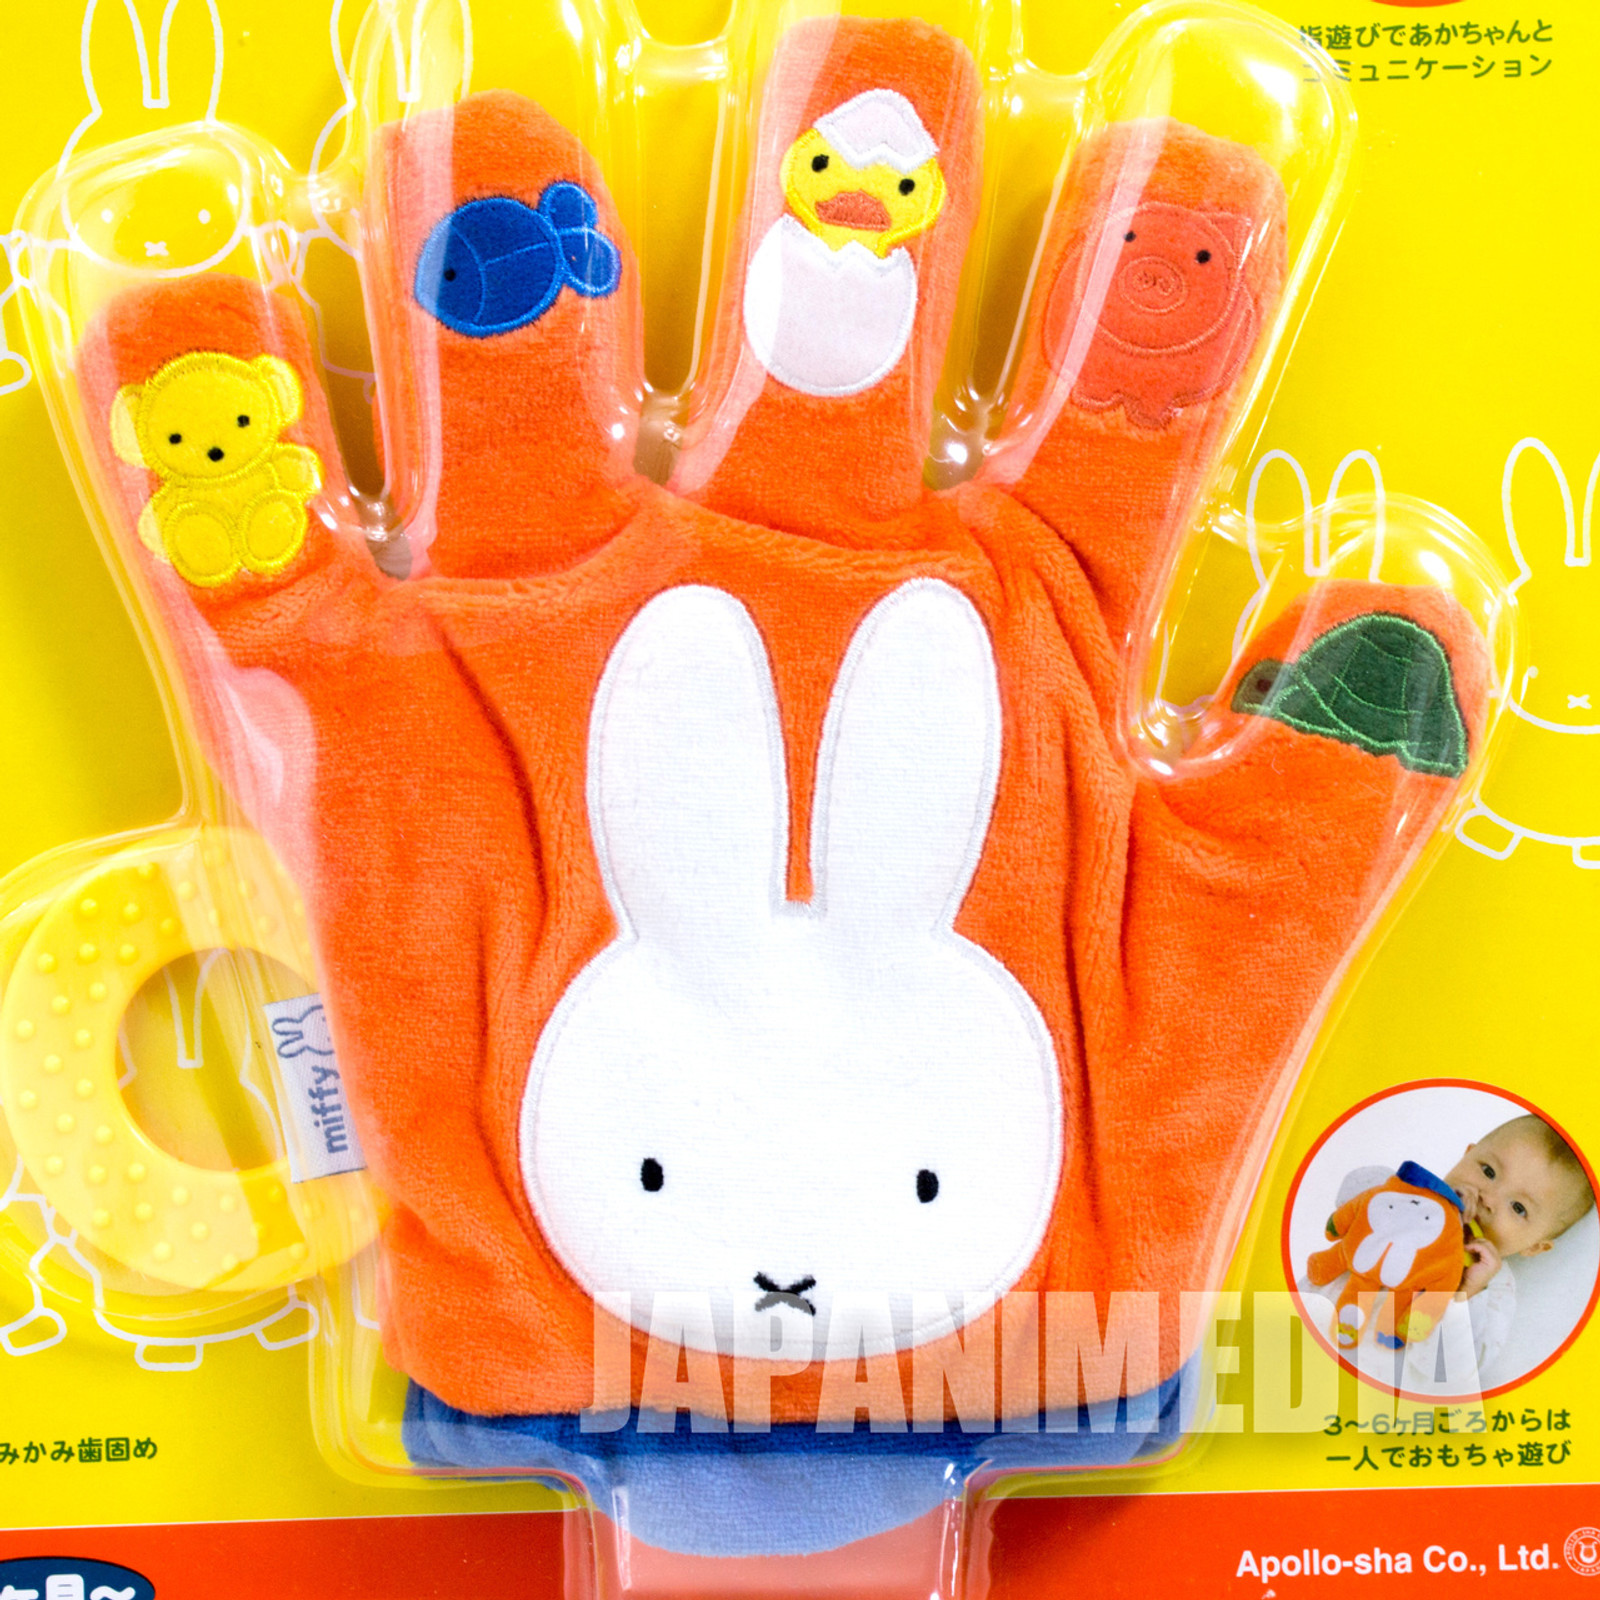 Miffy Baby Toy Groves for Infant Dick Bruna